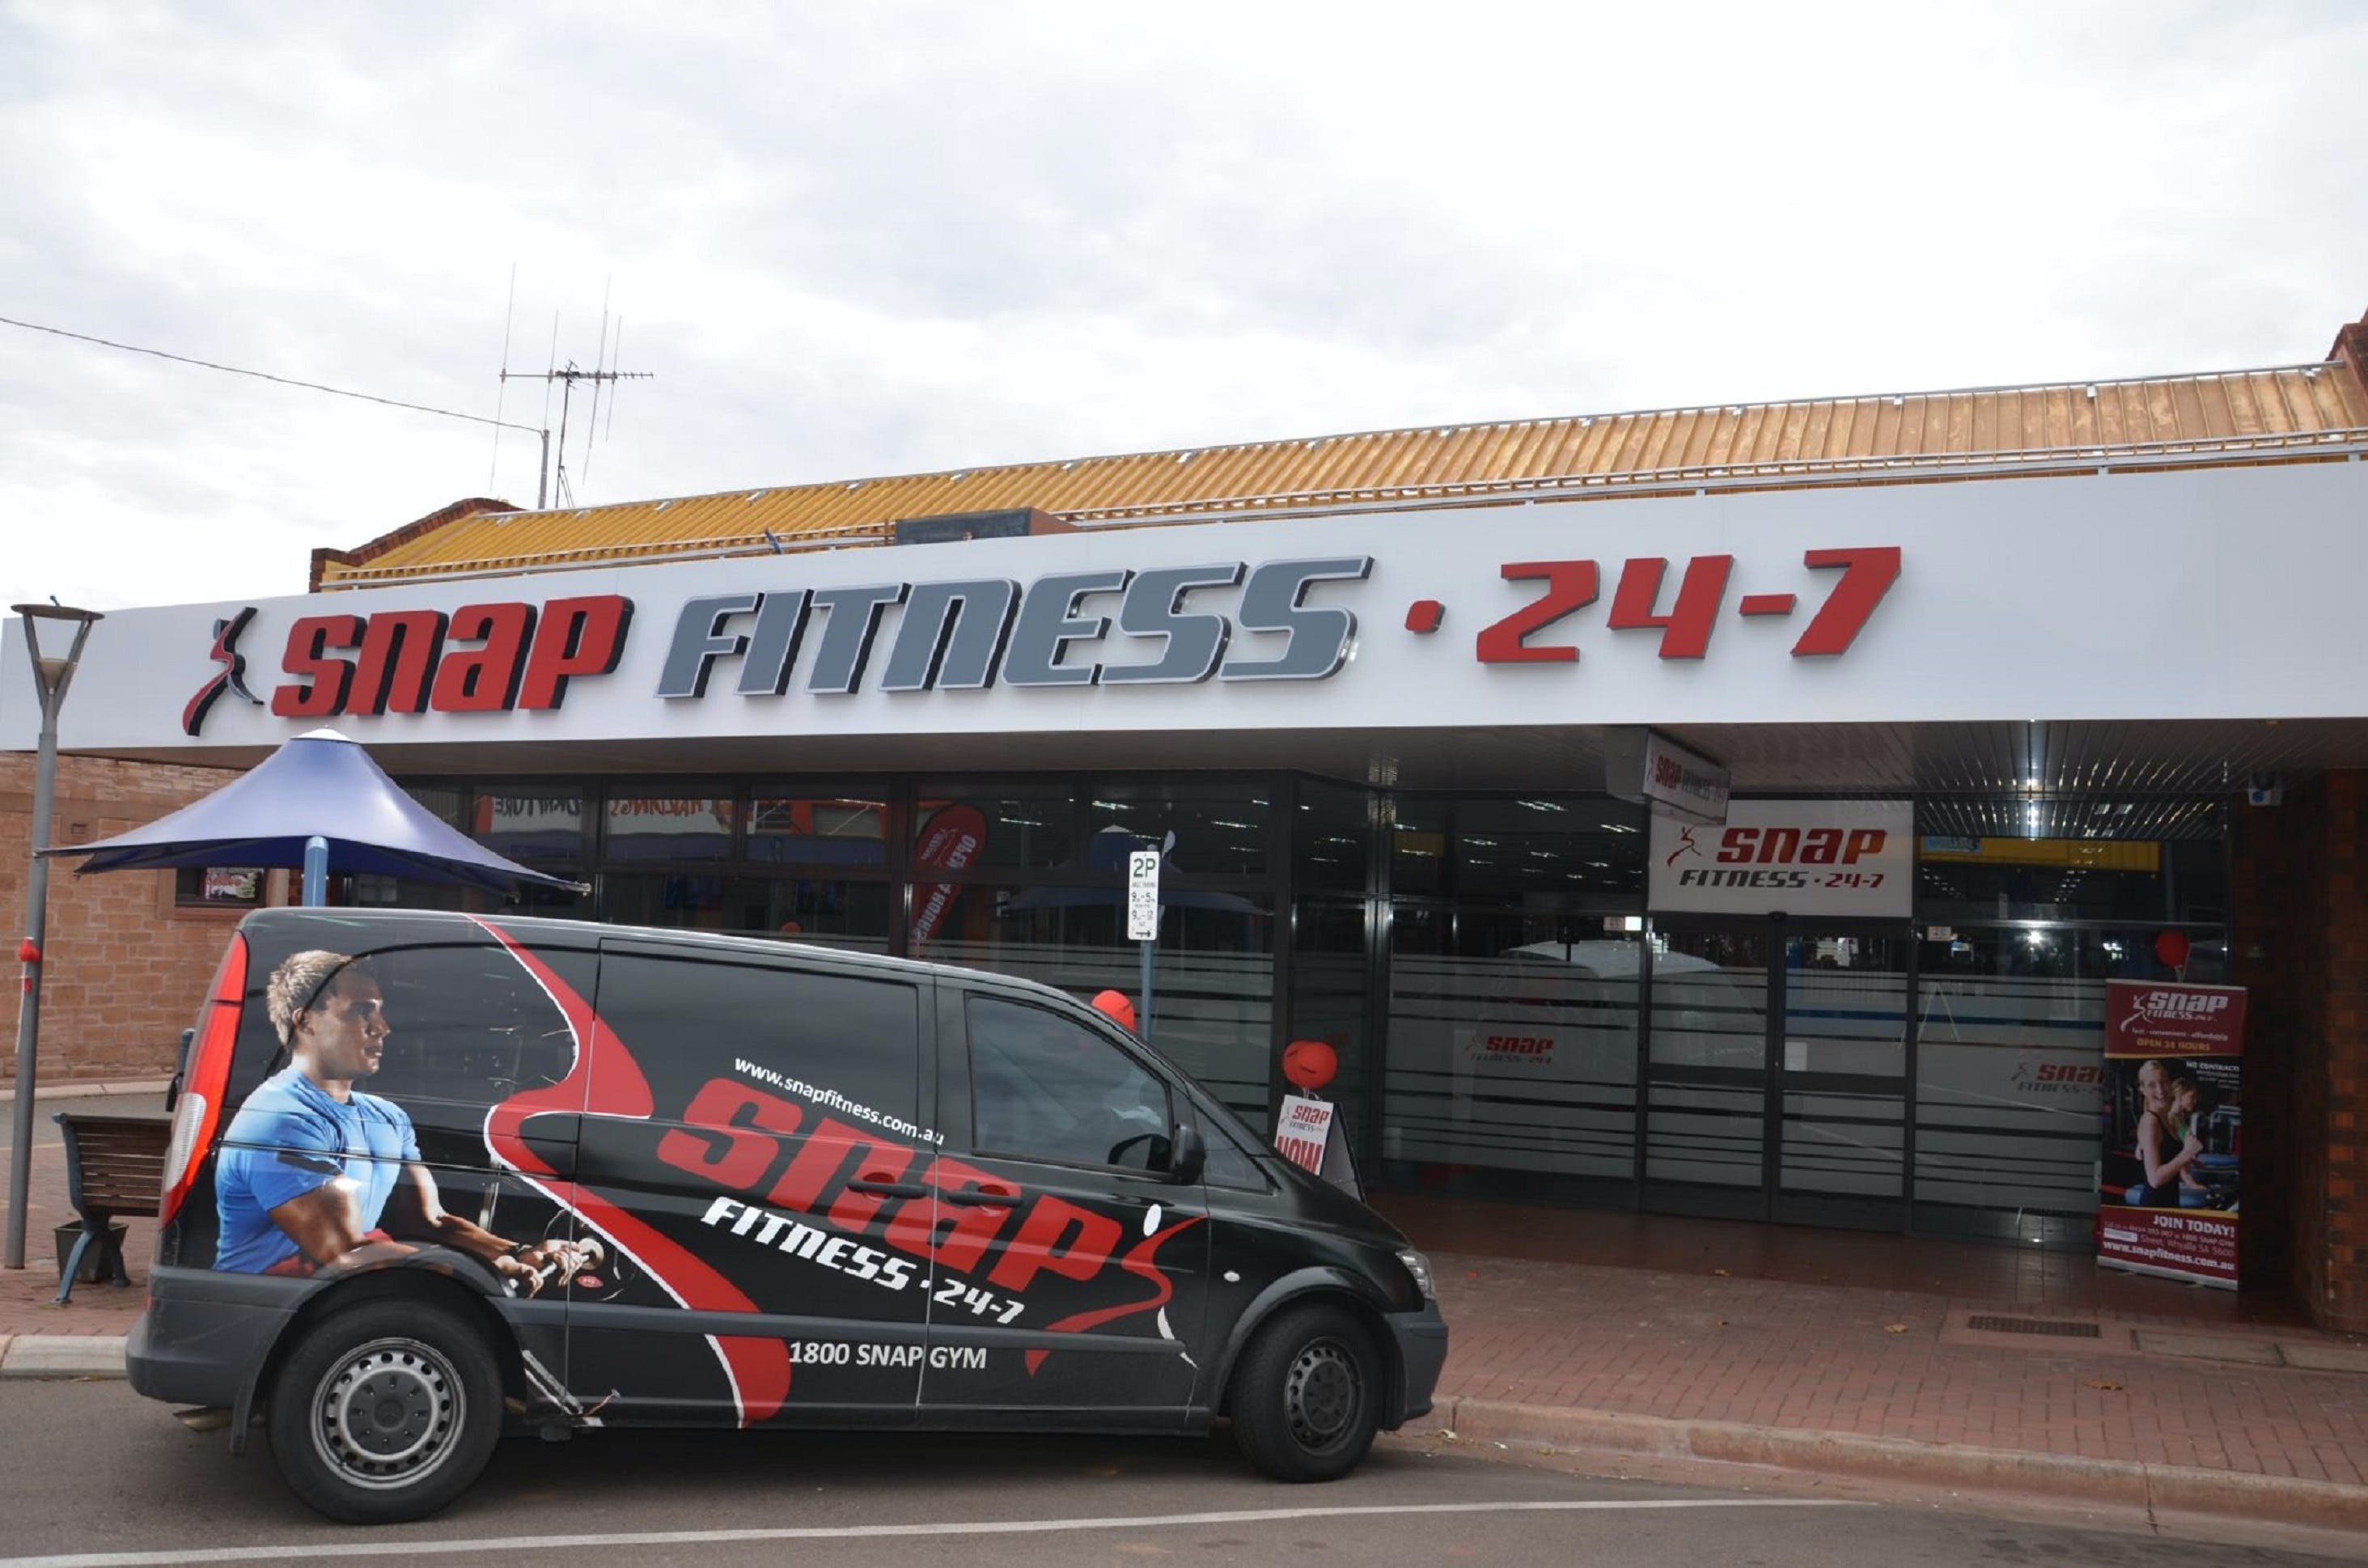 Snap Fitness Whyalla 24/7 gym - Hotel Accommodation